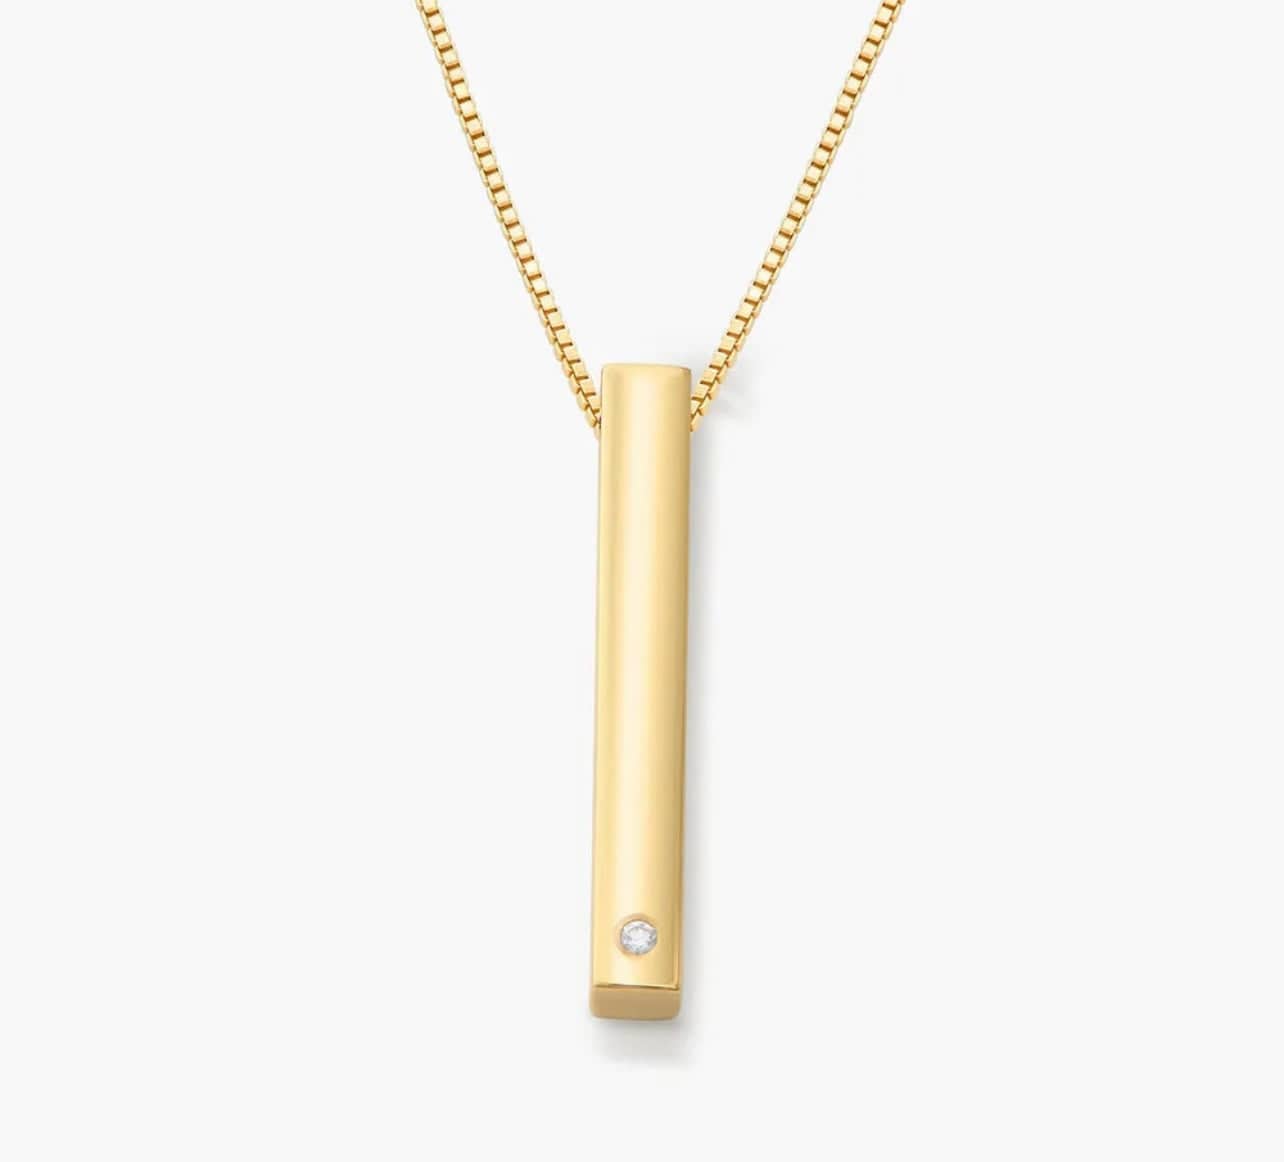 Cailin Gold Pendant Necklace in White Crystal | Kendra Scott